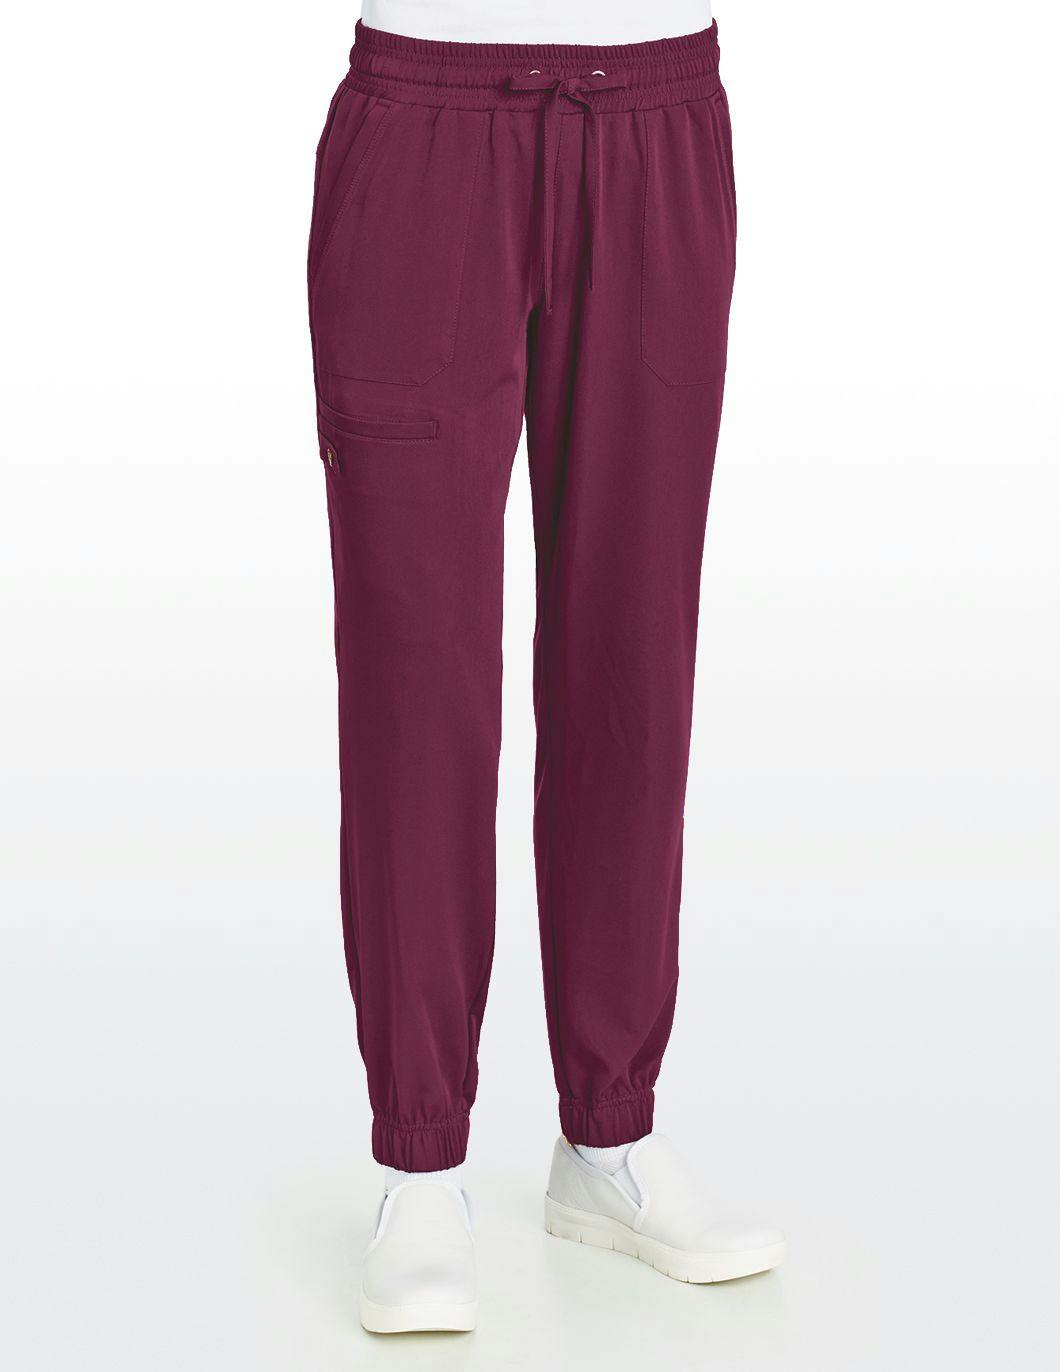 healing-hands-works-womens-jogger-pant-wine